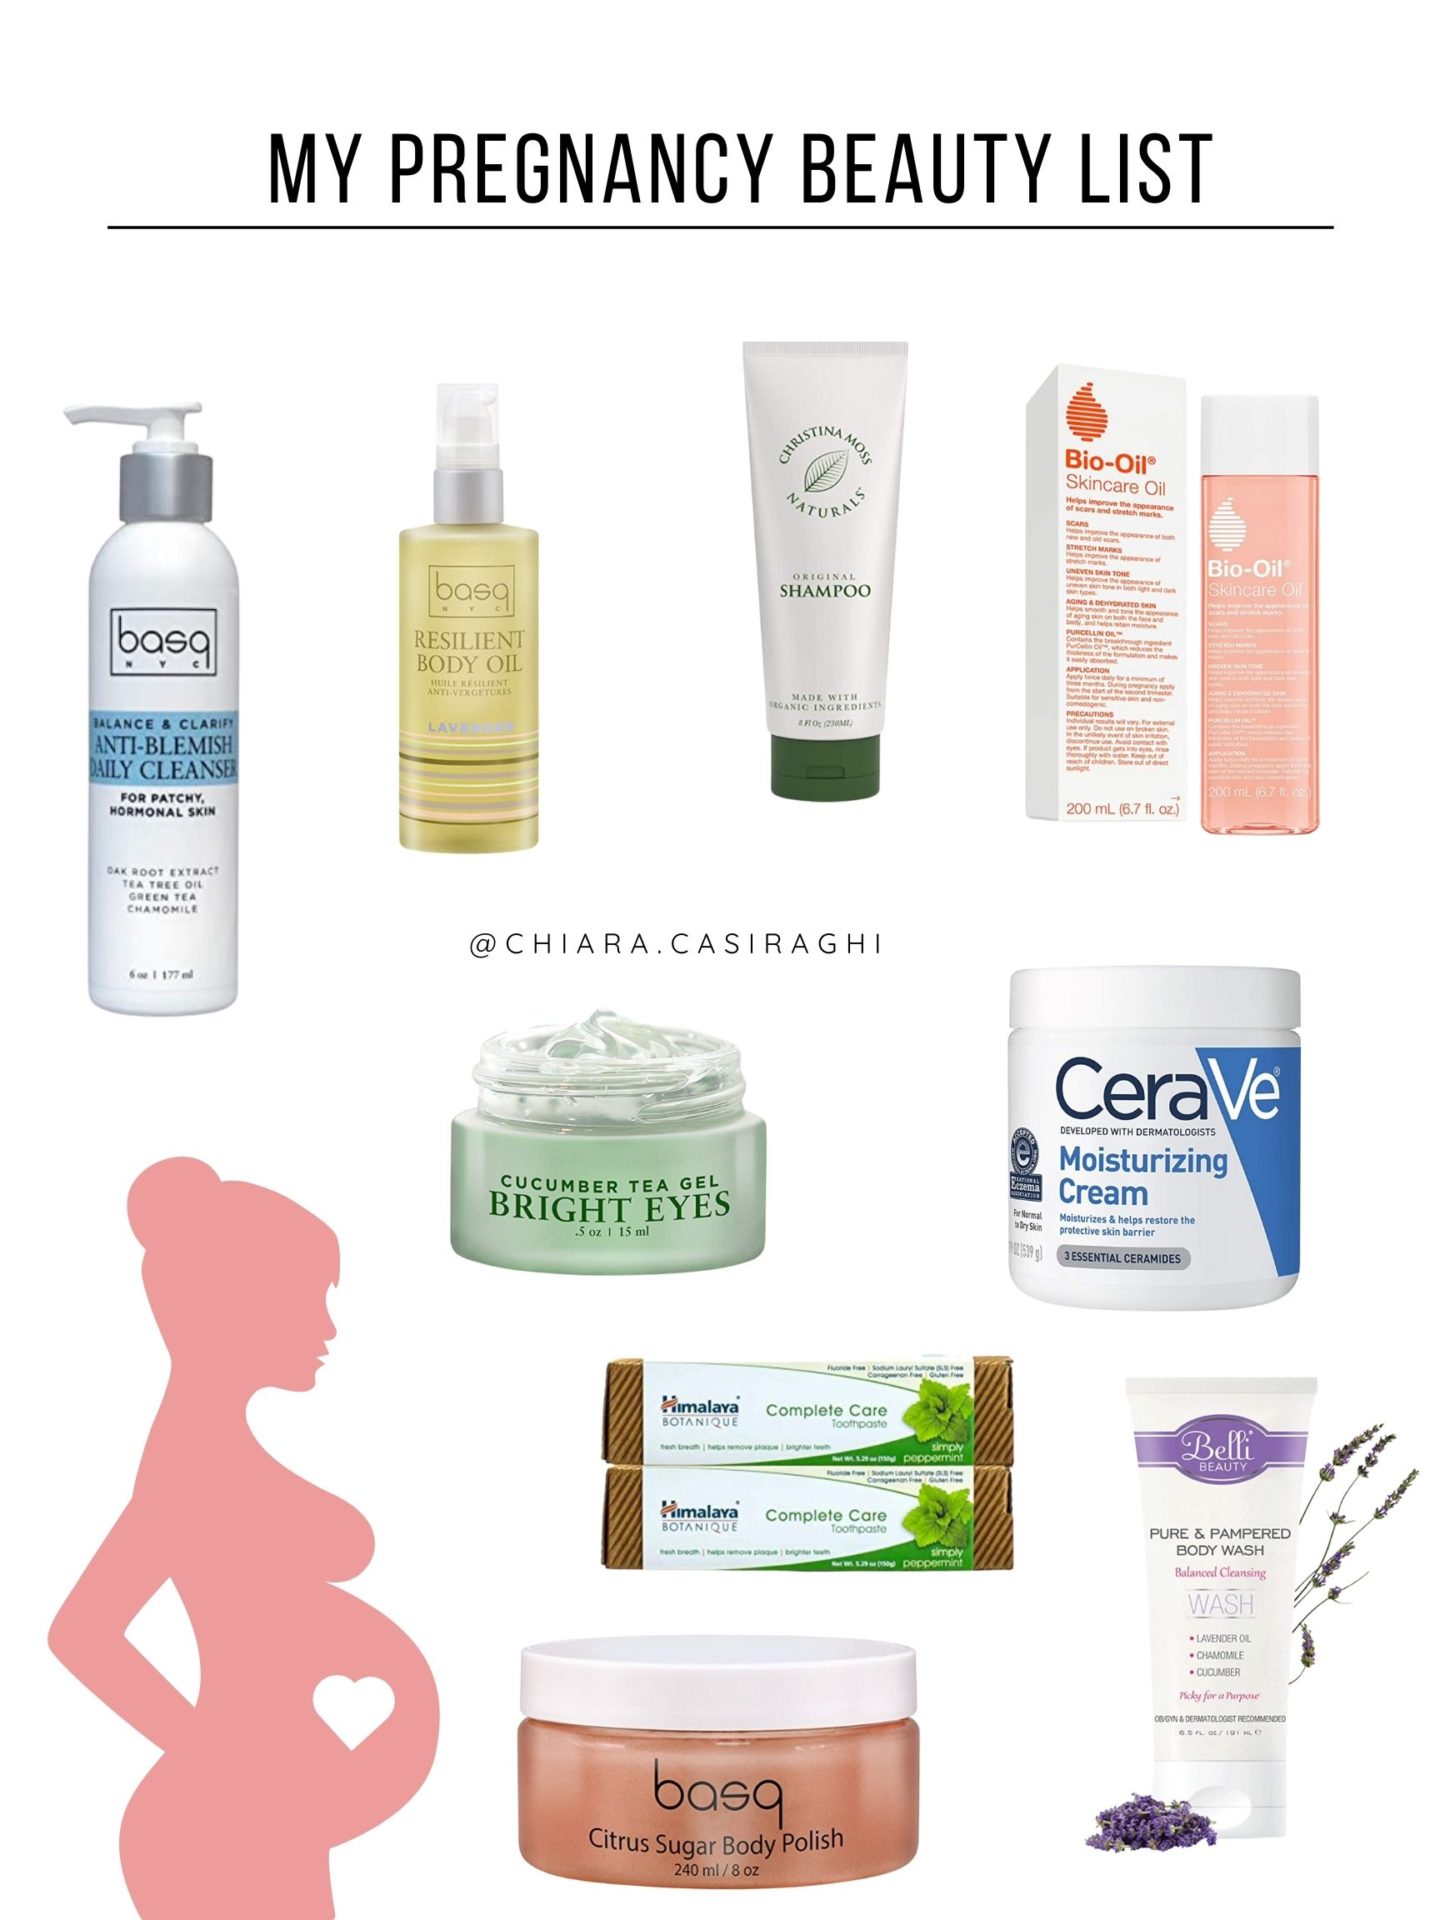 Pregnancy Beauty List | Beauty Products I’ve Swapped In During My Pregnancy